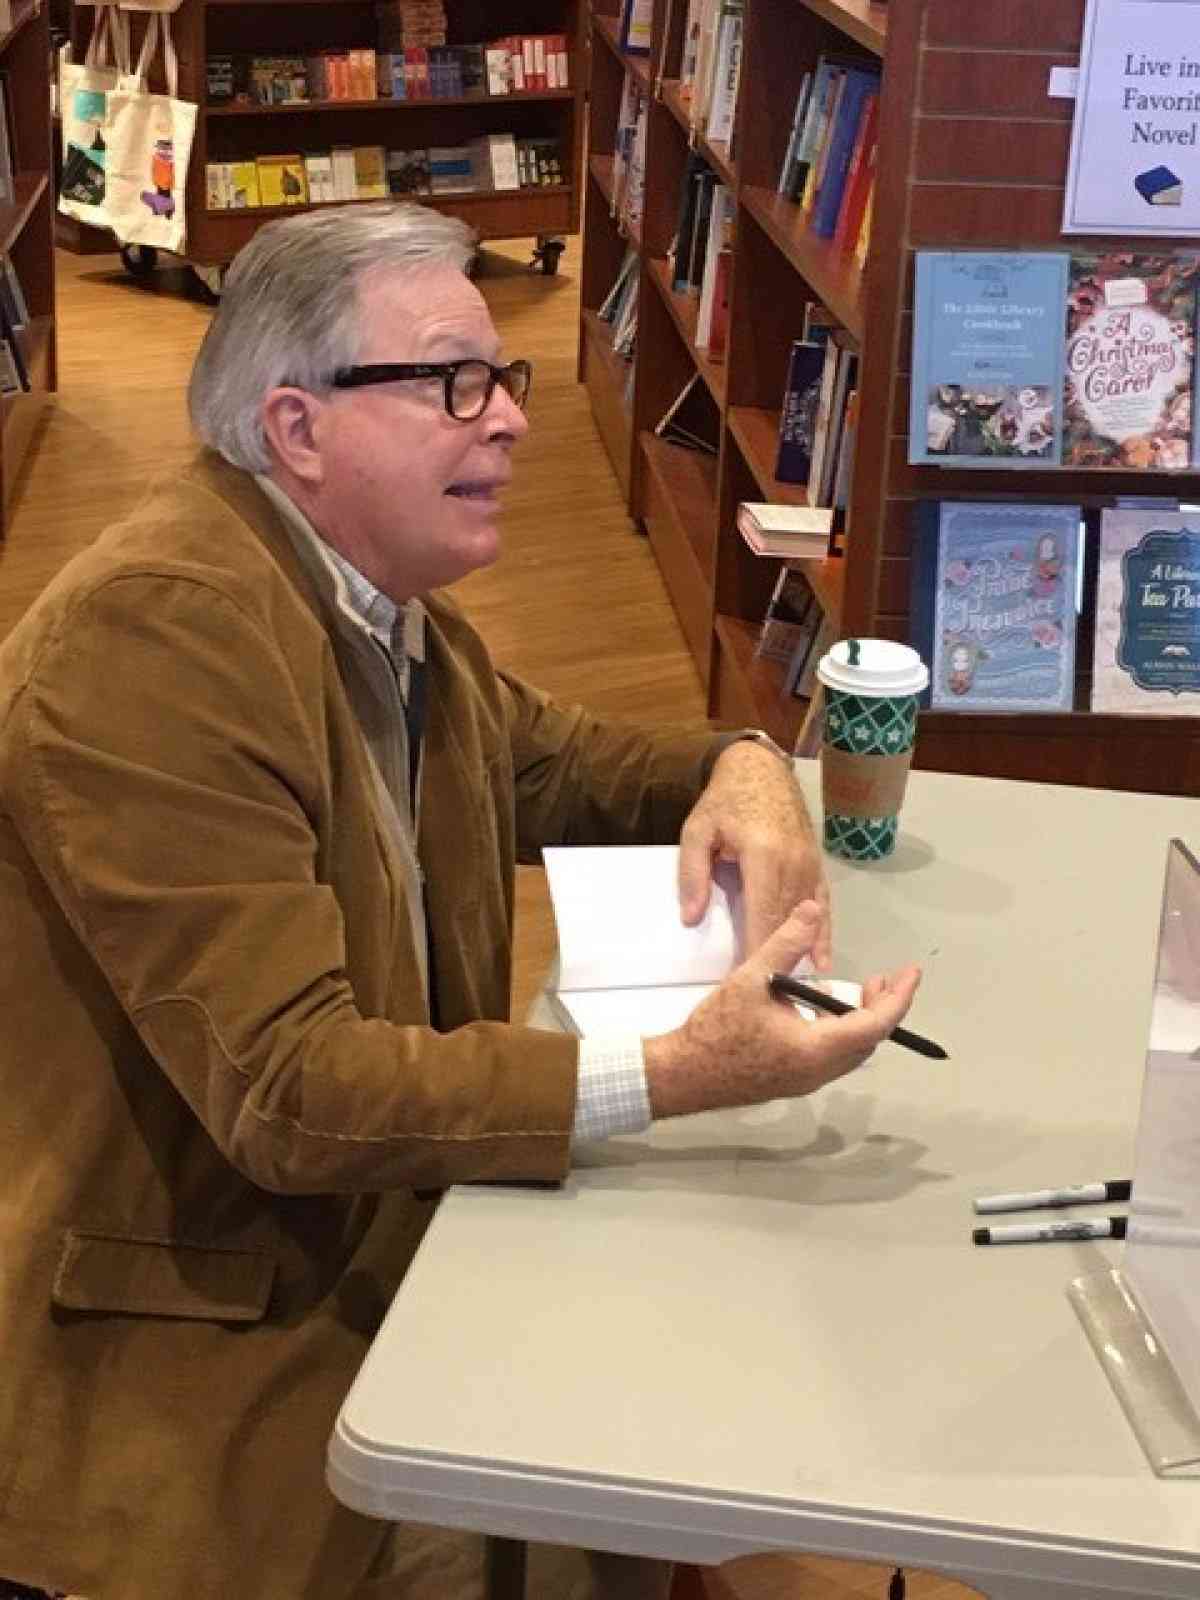 Ira-David-Wood-III-Attended-Book-Signing-Event-For-‘The-Russian-Galatea’-austin-macauley-publishers